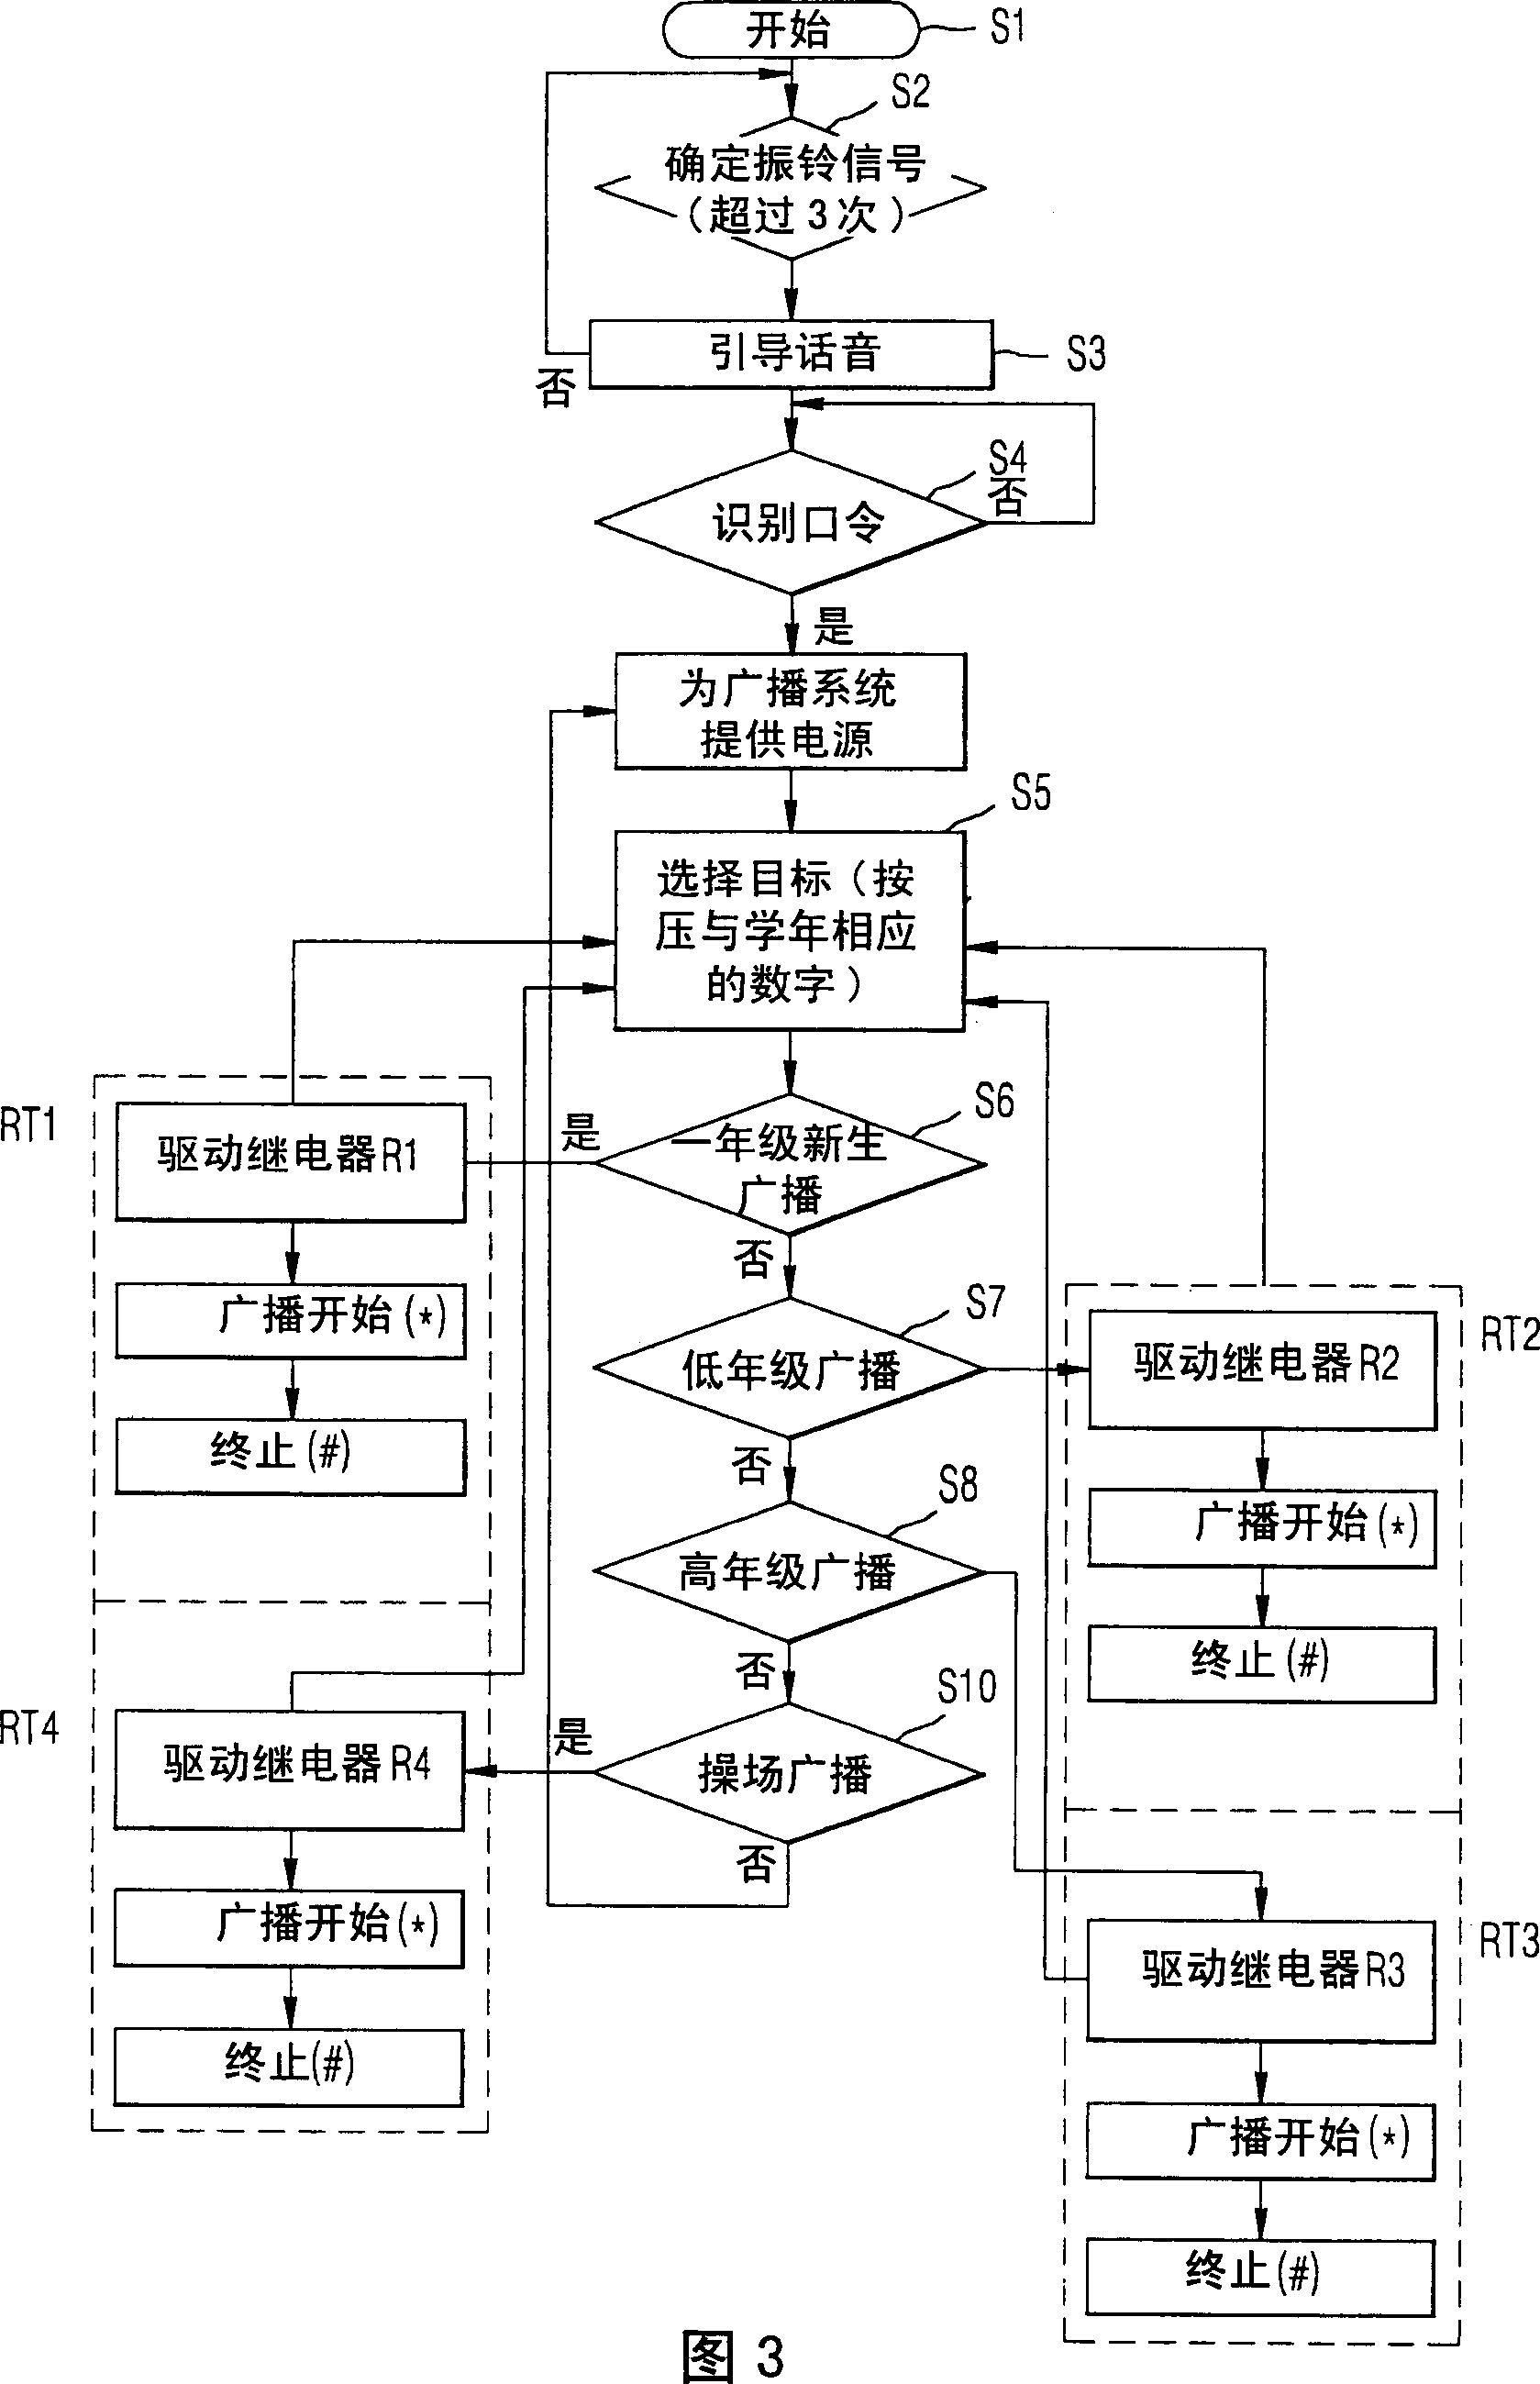 Method for controlling broadcast system by telephone and its control device